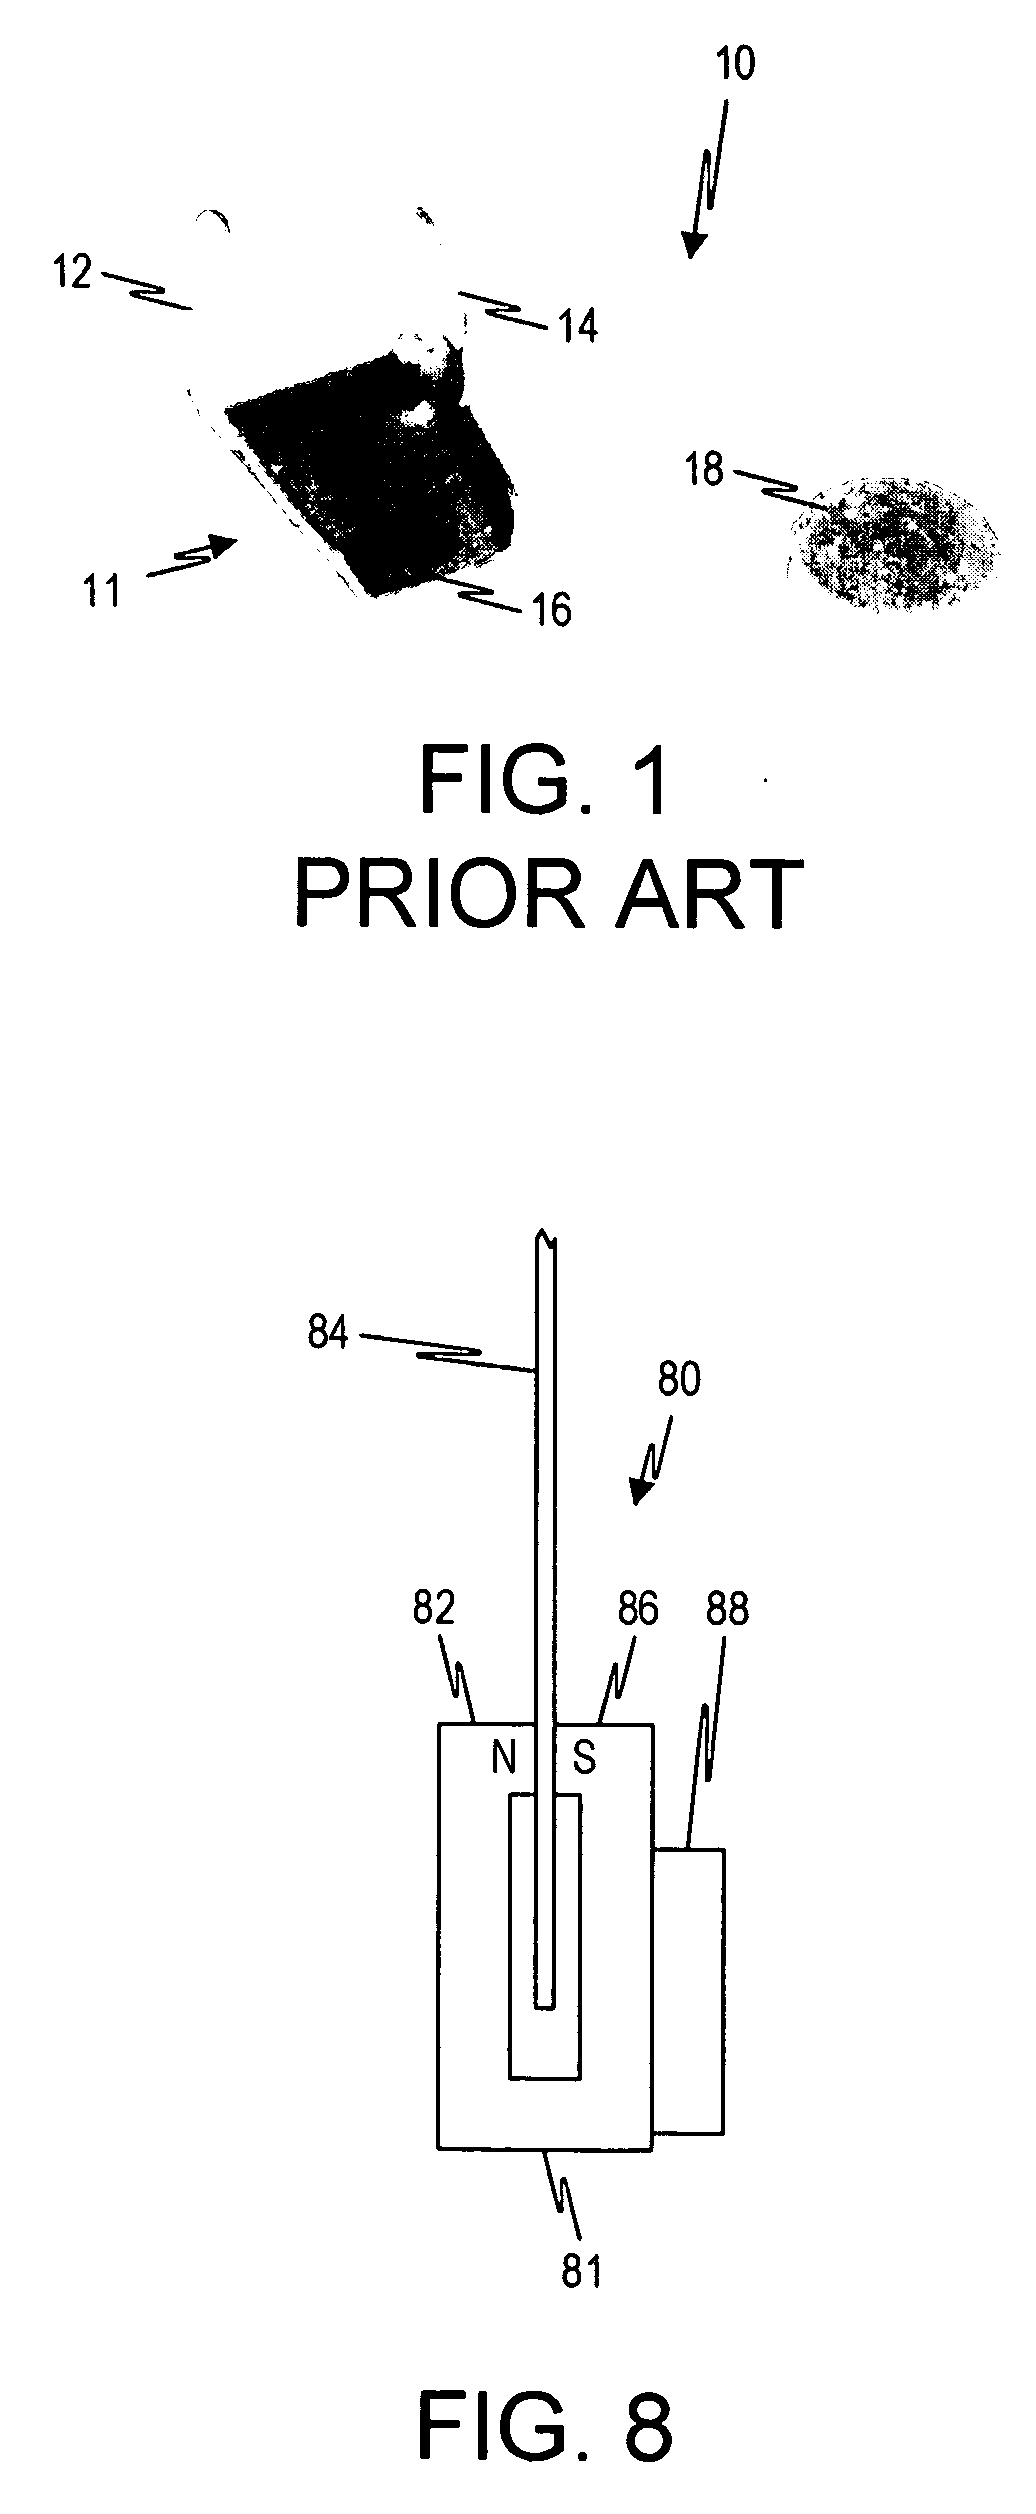 Apparatus and method for magnetically mounting an object to a sheet of material